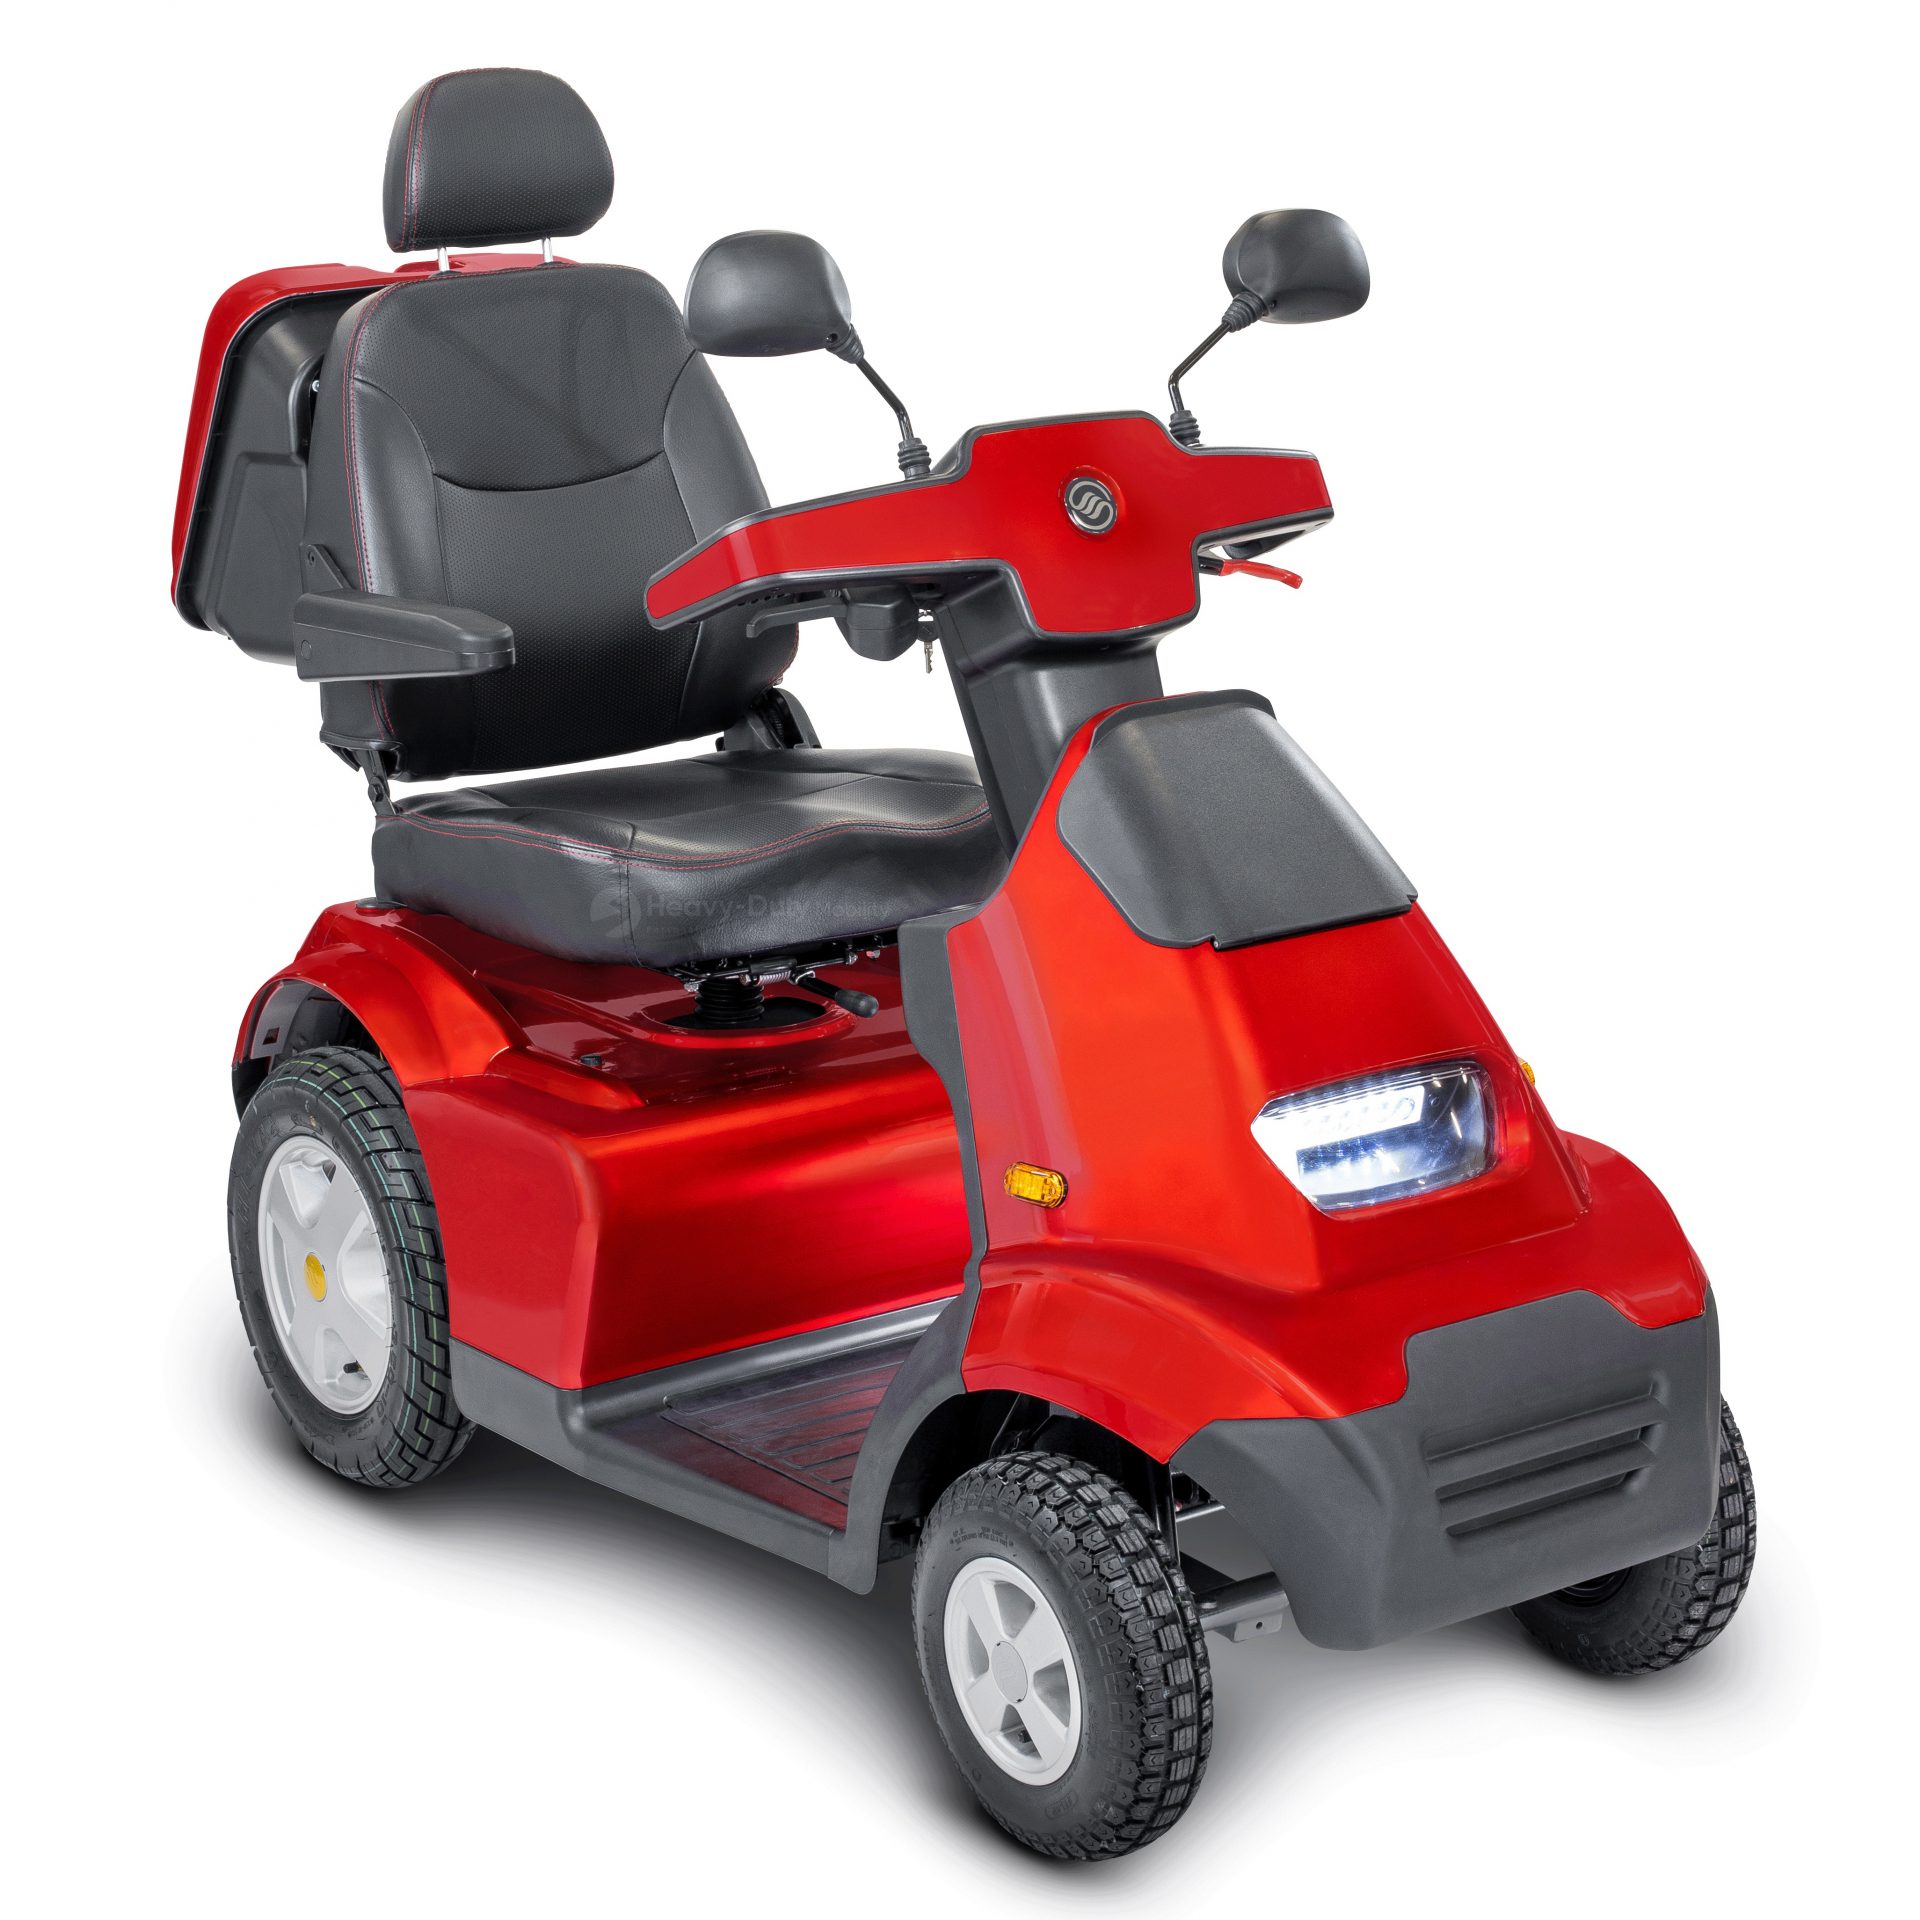 AfiScooter S4 All-Terrain 4-Wheel Scooter